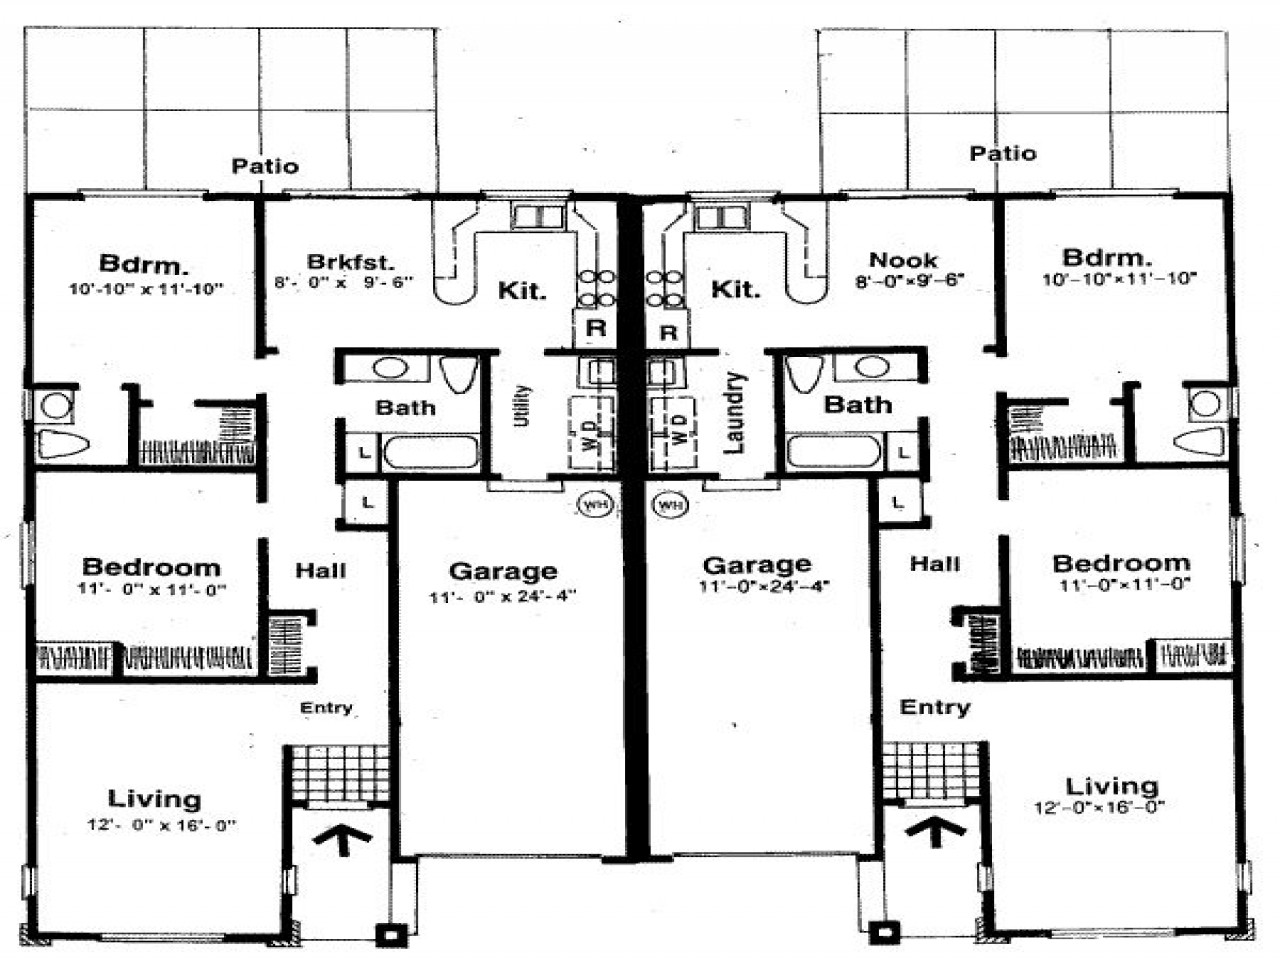 Two Master Bedrooms Floor Plans
 Small Two Bedroom House Plans House Plans with Two Master